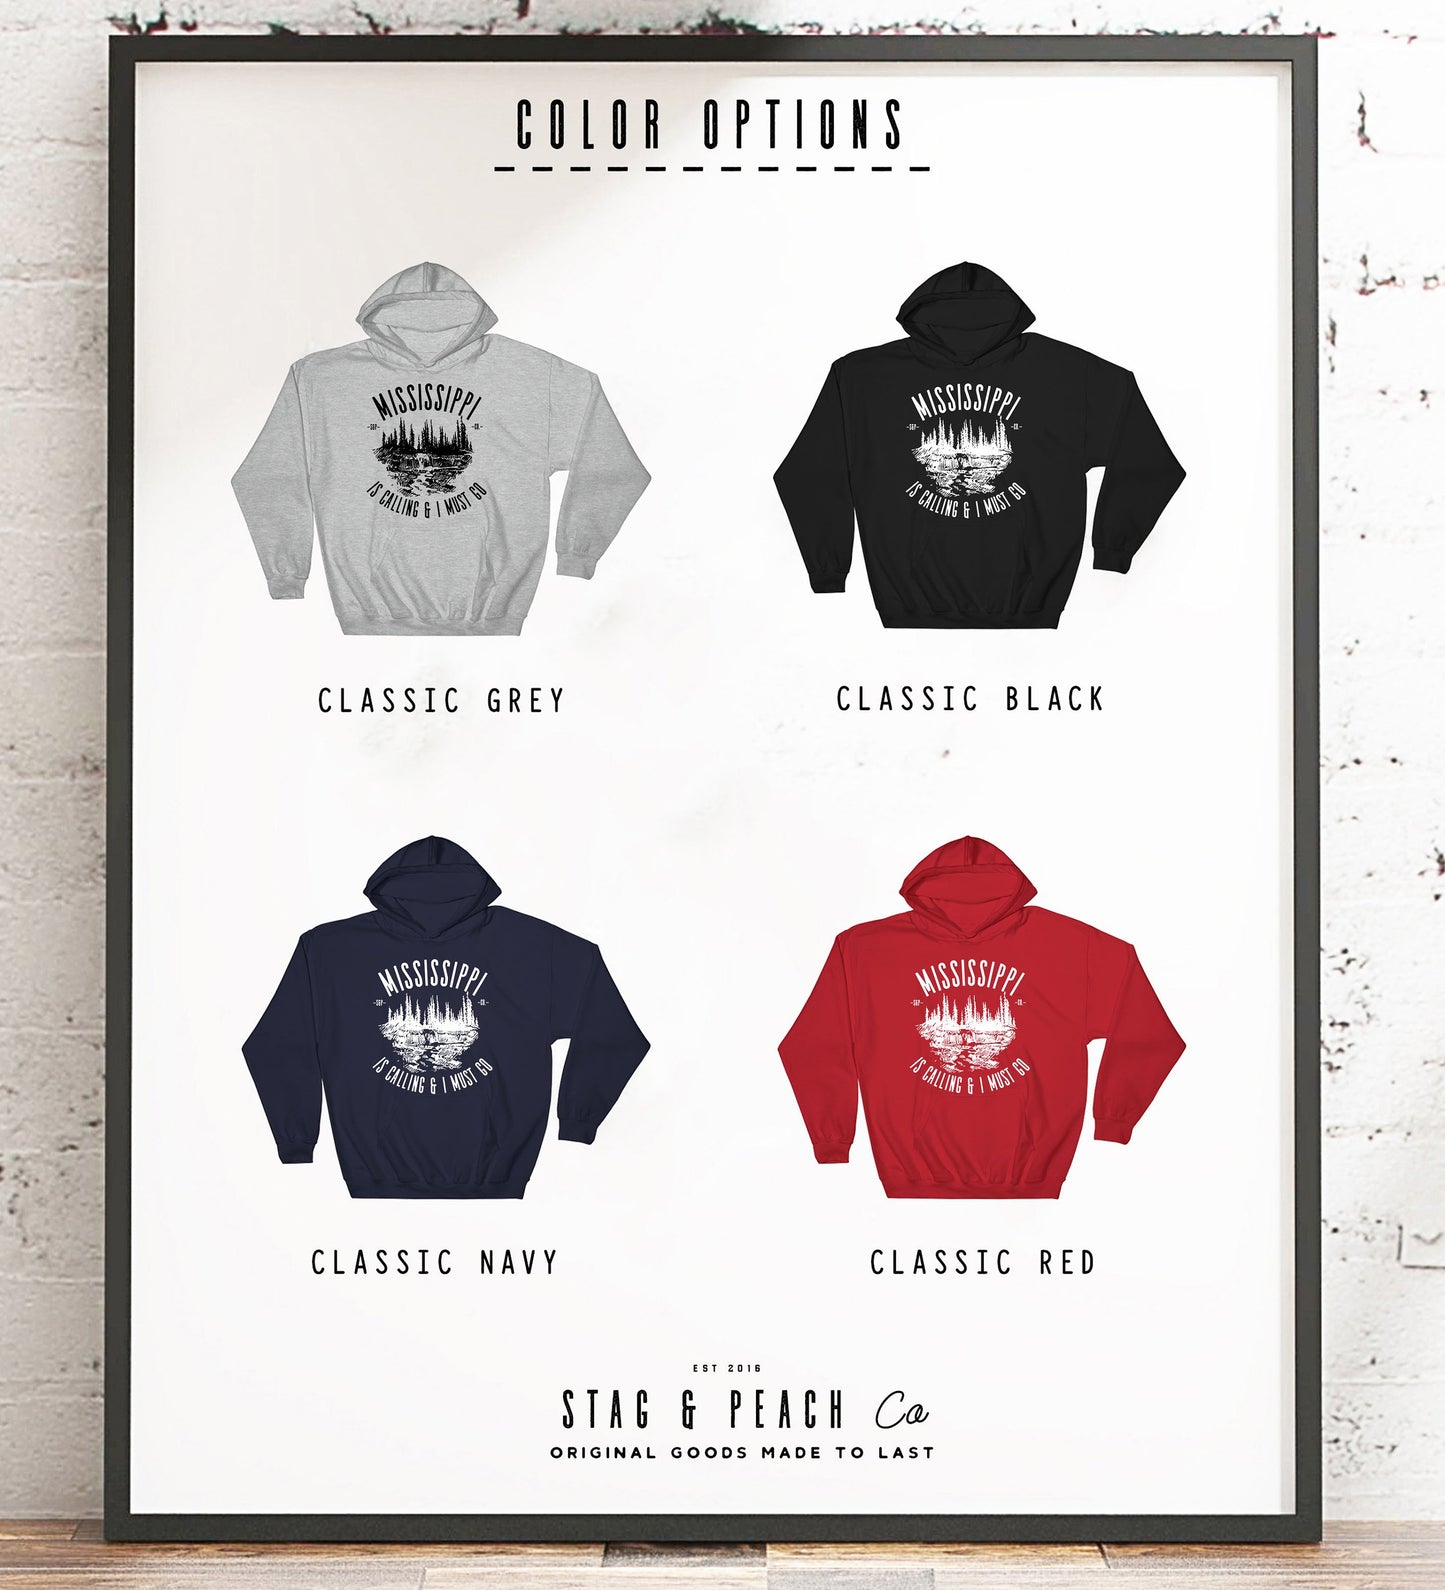 Mississippi Is Calling Hoodie - Mississippi Shirt, Home State Sweatshirt, Mississippi Pride Gift, MS State Shirt, Jackson Shirt, River Tee